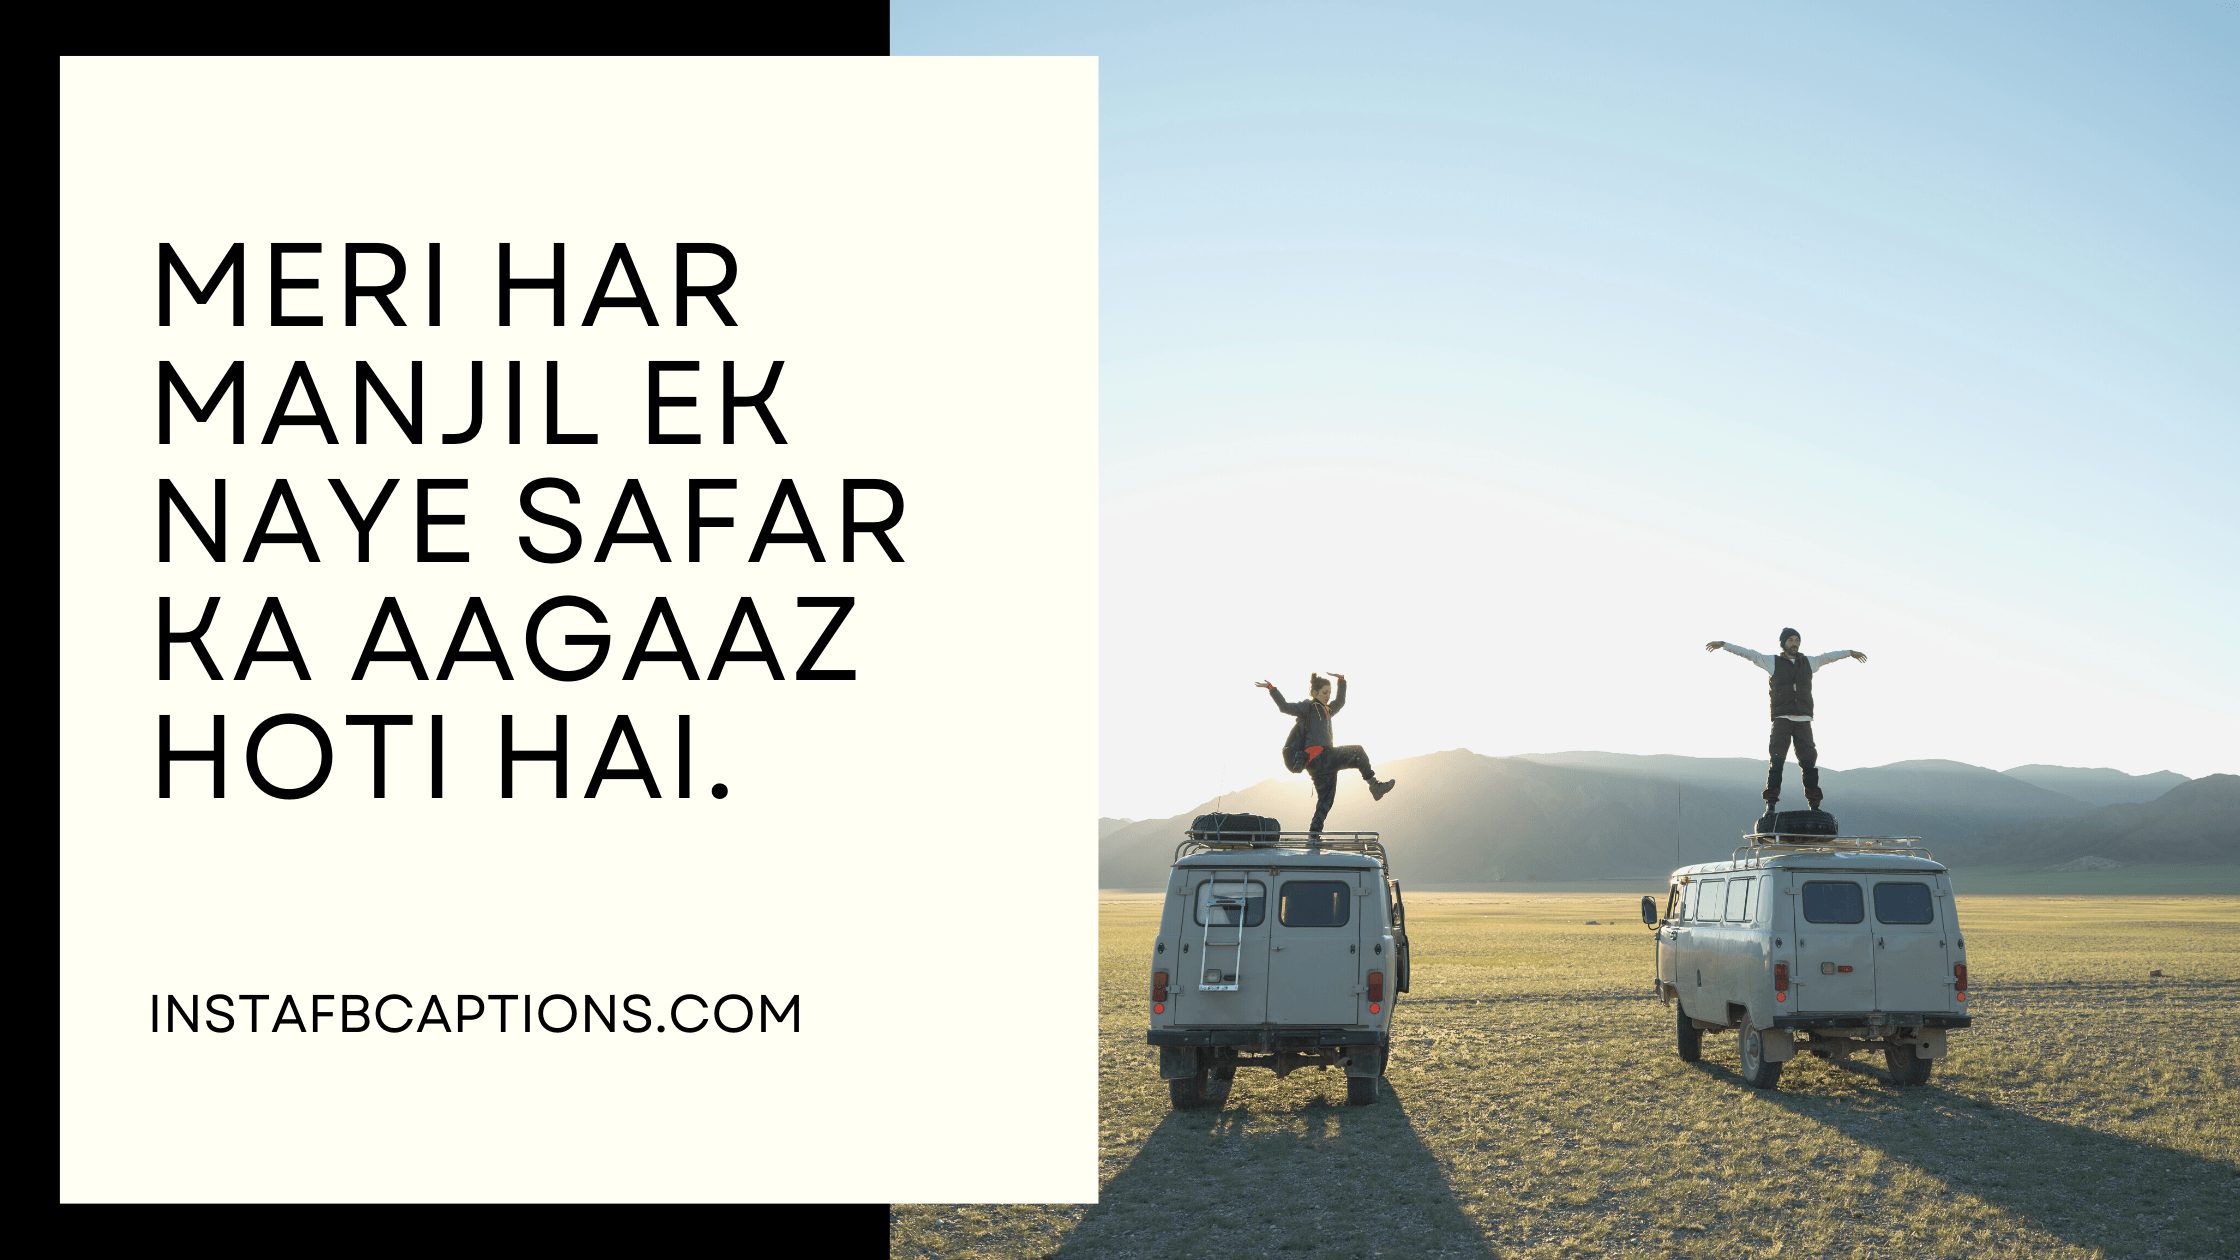 Hindi Travel Captions  - Hindi Travel Captions - Best TRAVEL Instagram Captions for your 2022 Trip